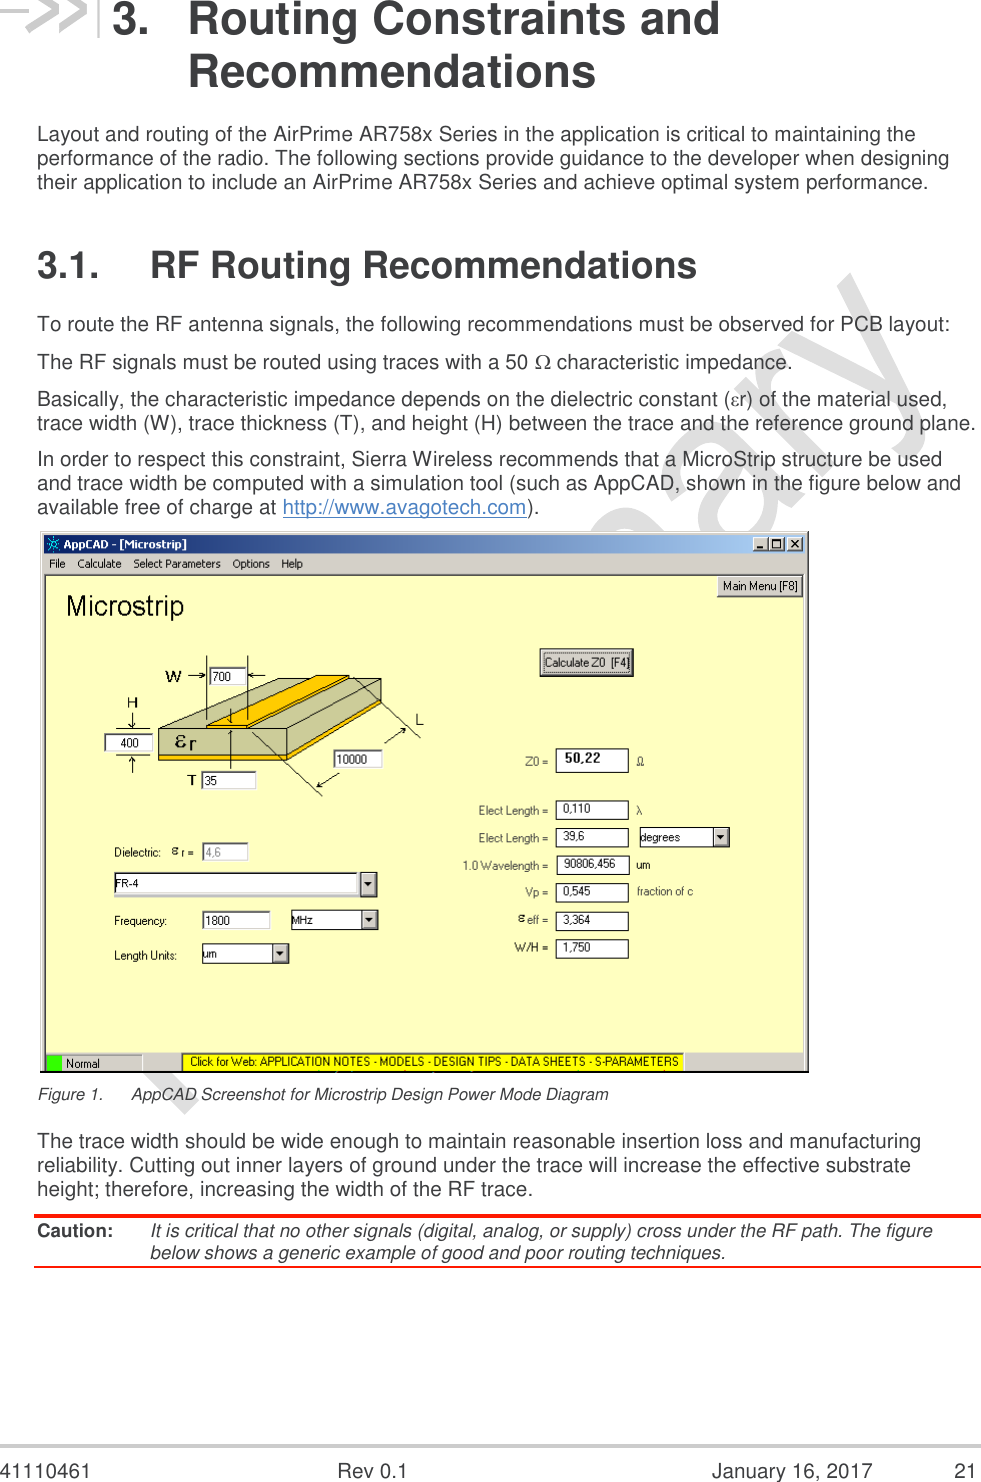  41110461  Rev 0.1  January 16, 2017  21 3.  Routing Constraints and Recommendations Layout and routing of the AirPrime AR758x Series in the application is critical to maintaining the performance of the radio. The following sections provide guidance to the developer when designing their application to include an AirPrime AR758x Series and achieve optimal system performance. 3.1.  RF Routing Recommendations To route the RF antenna signals, the following recommendations must be observed for PCB layout: The RF signals must be routed using traces with a 50  characteristic impedance. Basically, the characteristic impedance depends on the dielectric constant (εr) of the material used, trace width (W), trace thickness (T), and height (H) between the trace and the reference ground plane. In order to respect this constraint, Sierra Wireless recommends that a MicroStrip structure be used and trace width be computed with a simulation tool (such as AppCAD, shown in the figure below and available free of charge at http://www.avagotech.com).  Figure 1.  AppCAD Screenshot for Microstrip Design Power Mode Diagram The trace width should be wide enough to maintain reasonable insertion loss and manufacturing reliability. Cutting out inner layers of ground under the trace will increase the effective substrate height; therefore, increasing the width of the RF trace. Caution:  It is critical that no other signals (digital, analog, or supply) cross under the RF path. The figure below shows a generic example of good and poor routing techniques. 